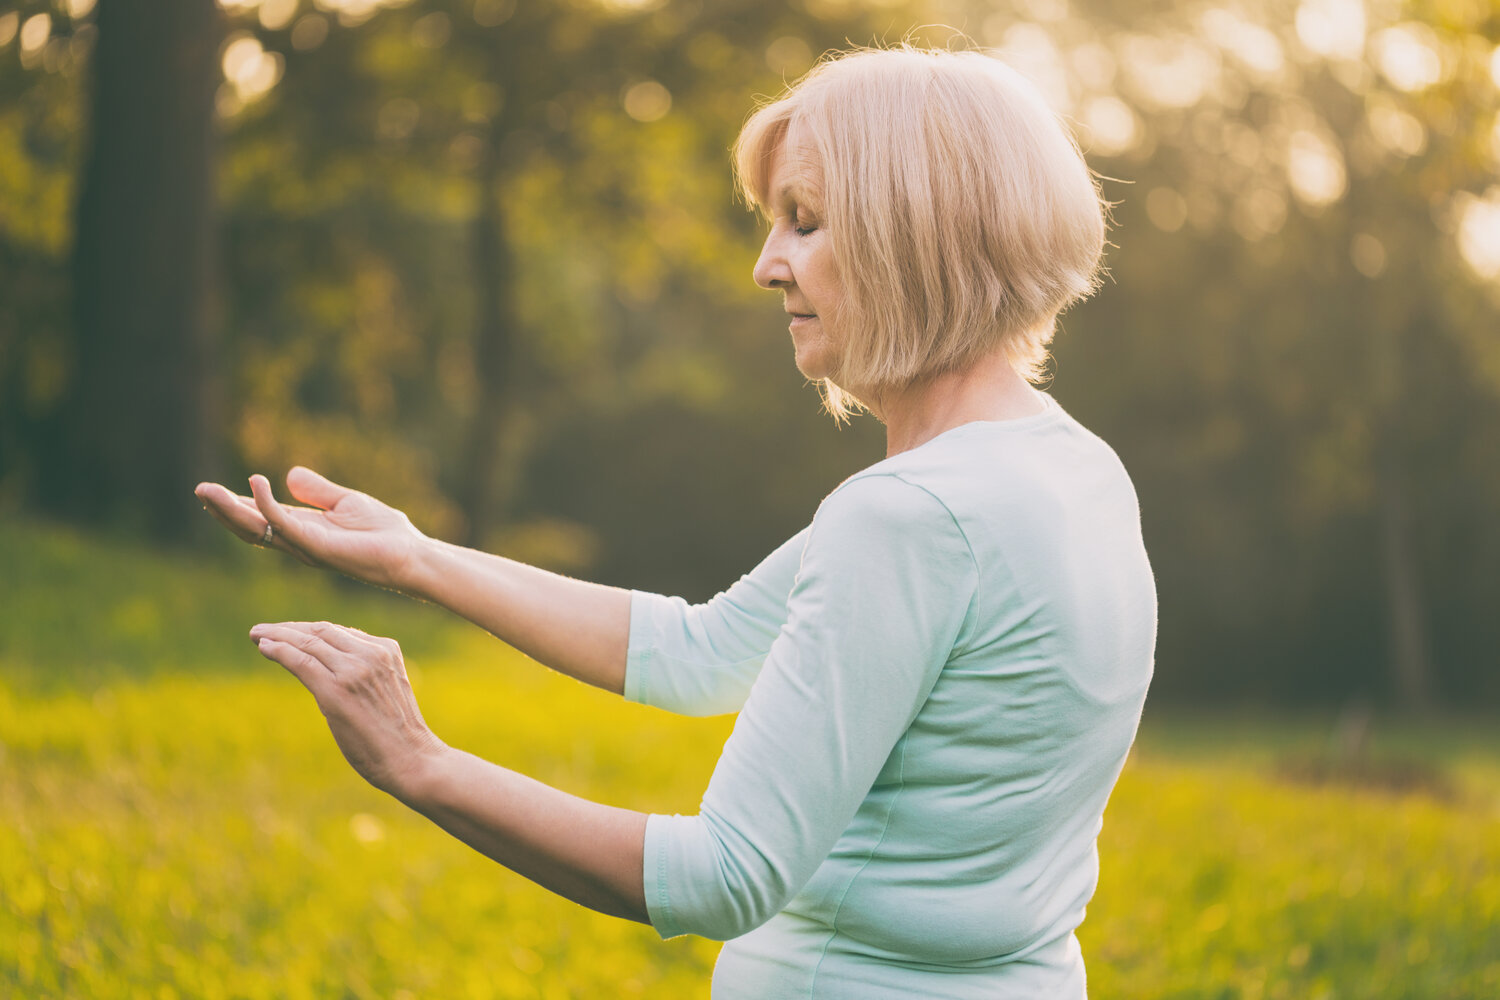 Tai chi offers seniors both enjoyable exercise and improved mobility.